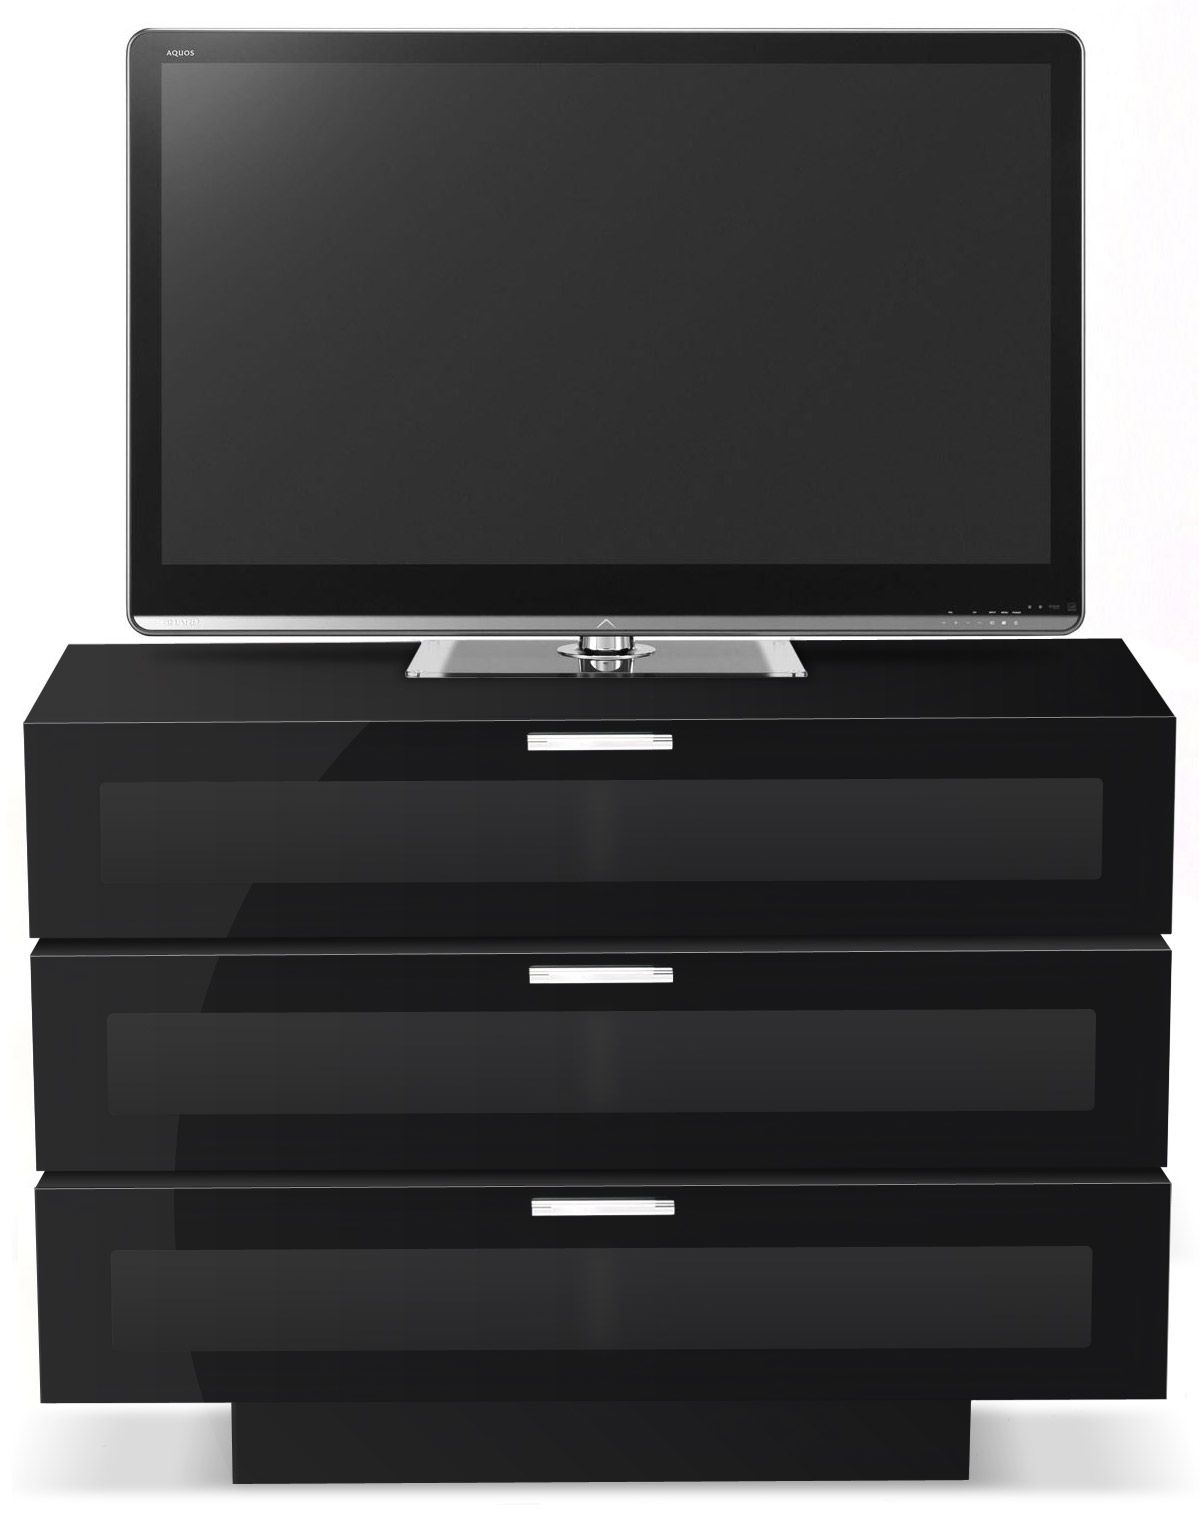 Stil Stand Stuk 4001 Bl – 3 Tv For Up To 50 Inch Tvs Pertaining To Stil Tv Stands (View 3 of 15)